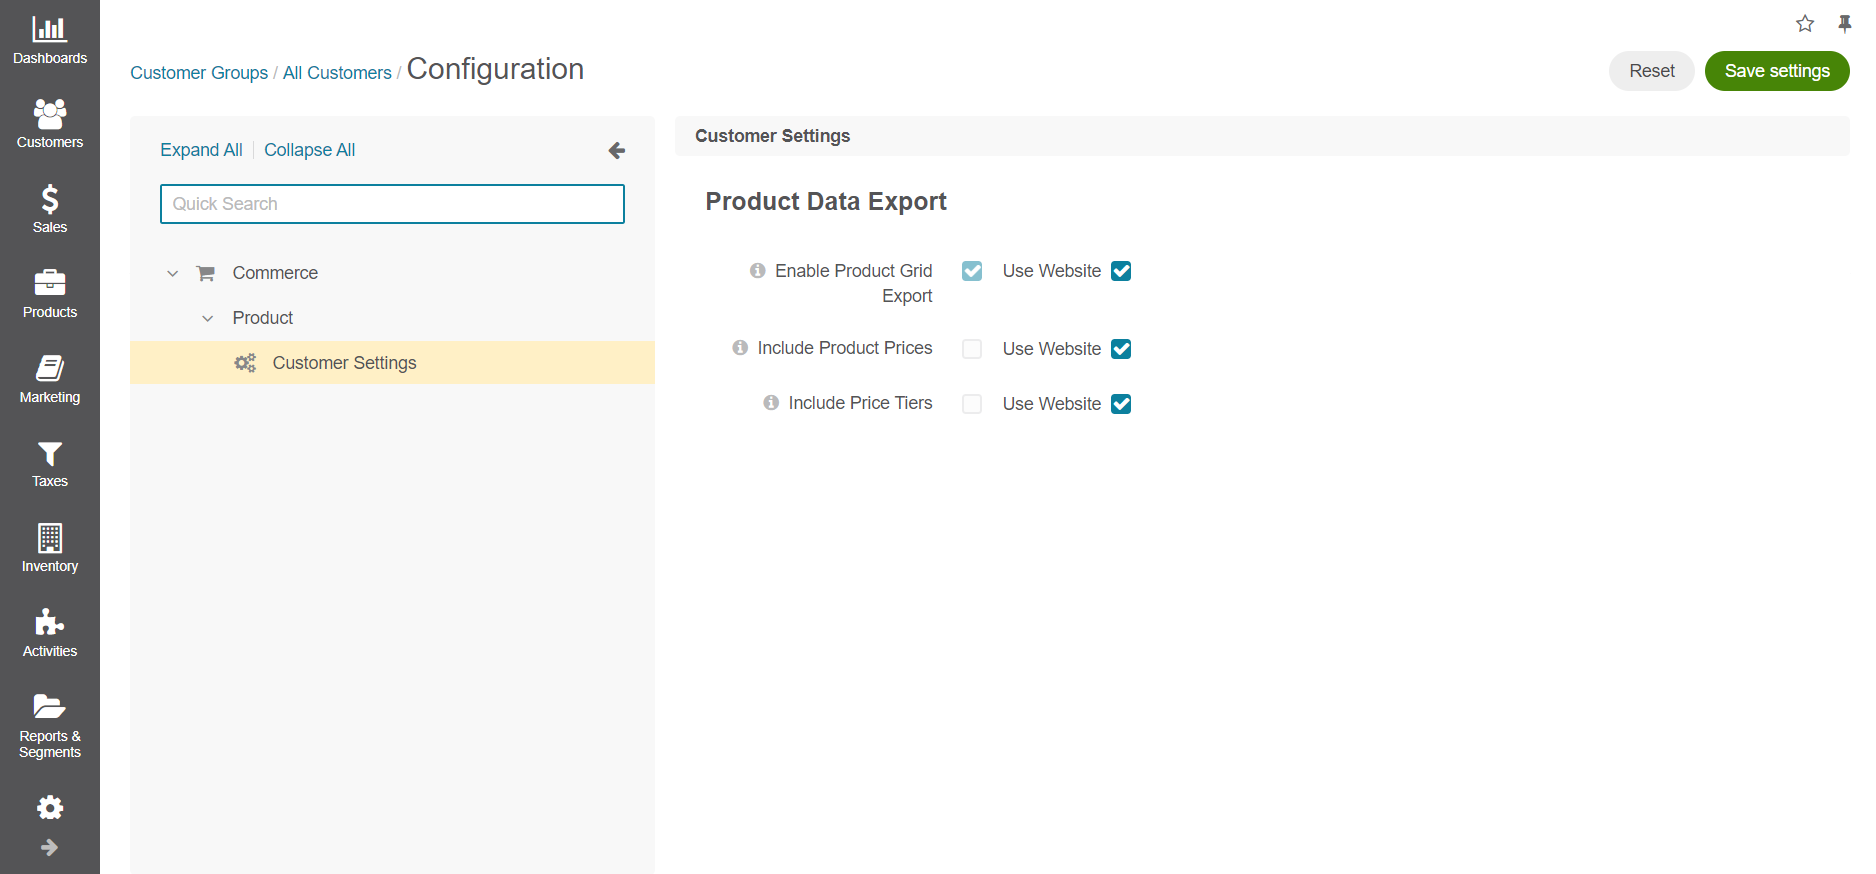 Product data export configuration options on customer group level